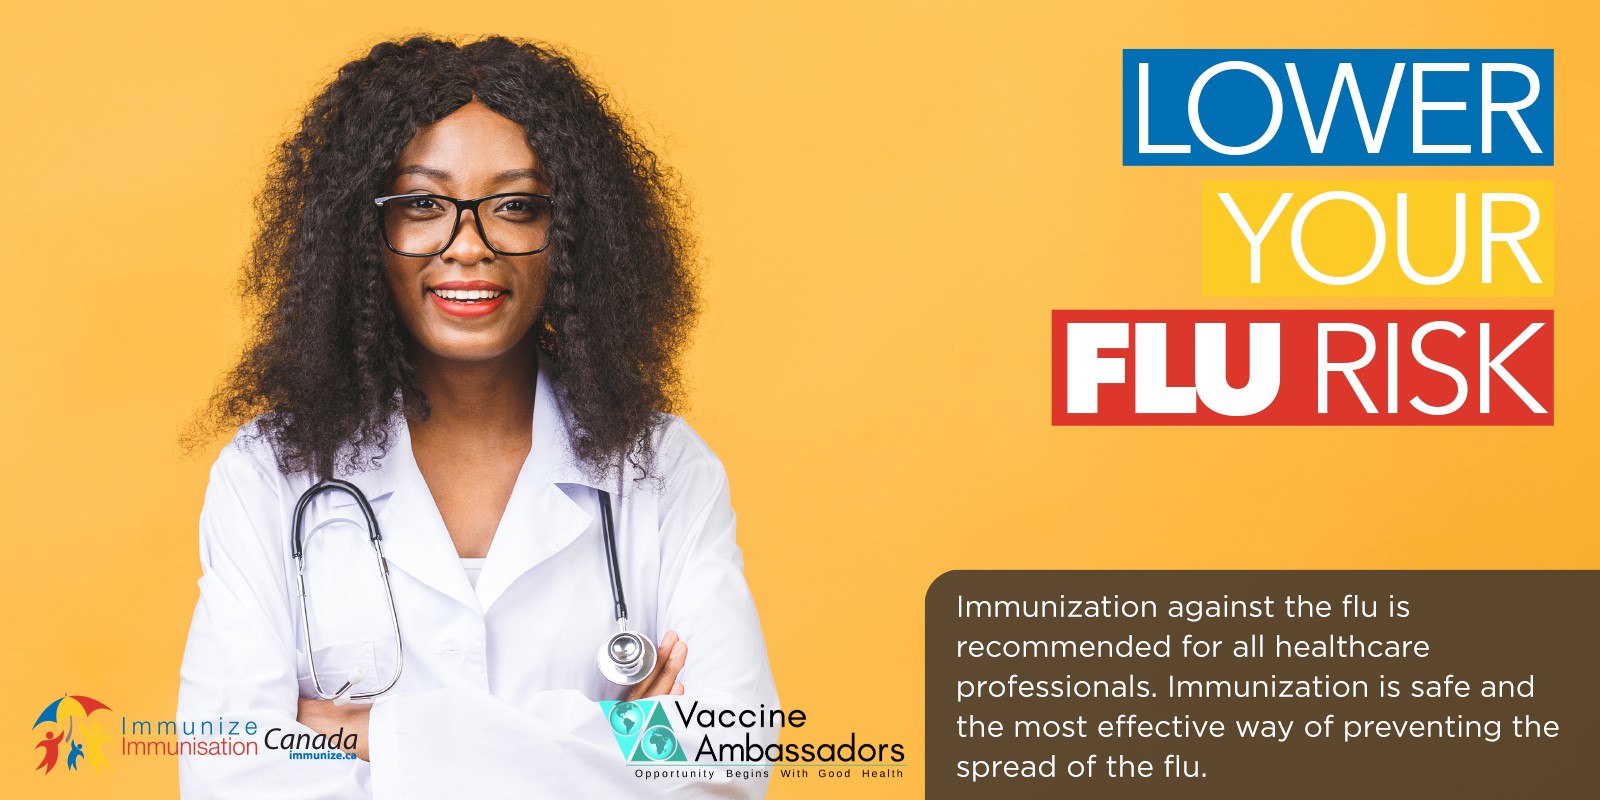 Lower your flu risk - health care professionals